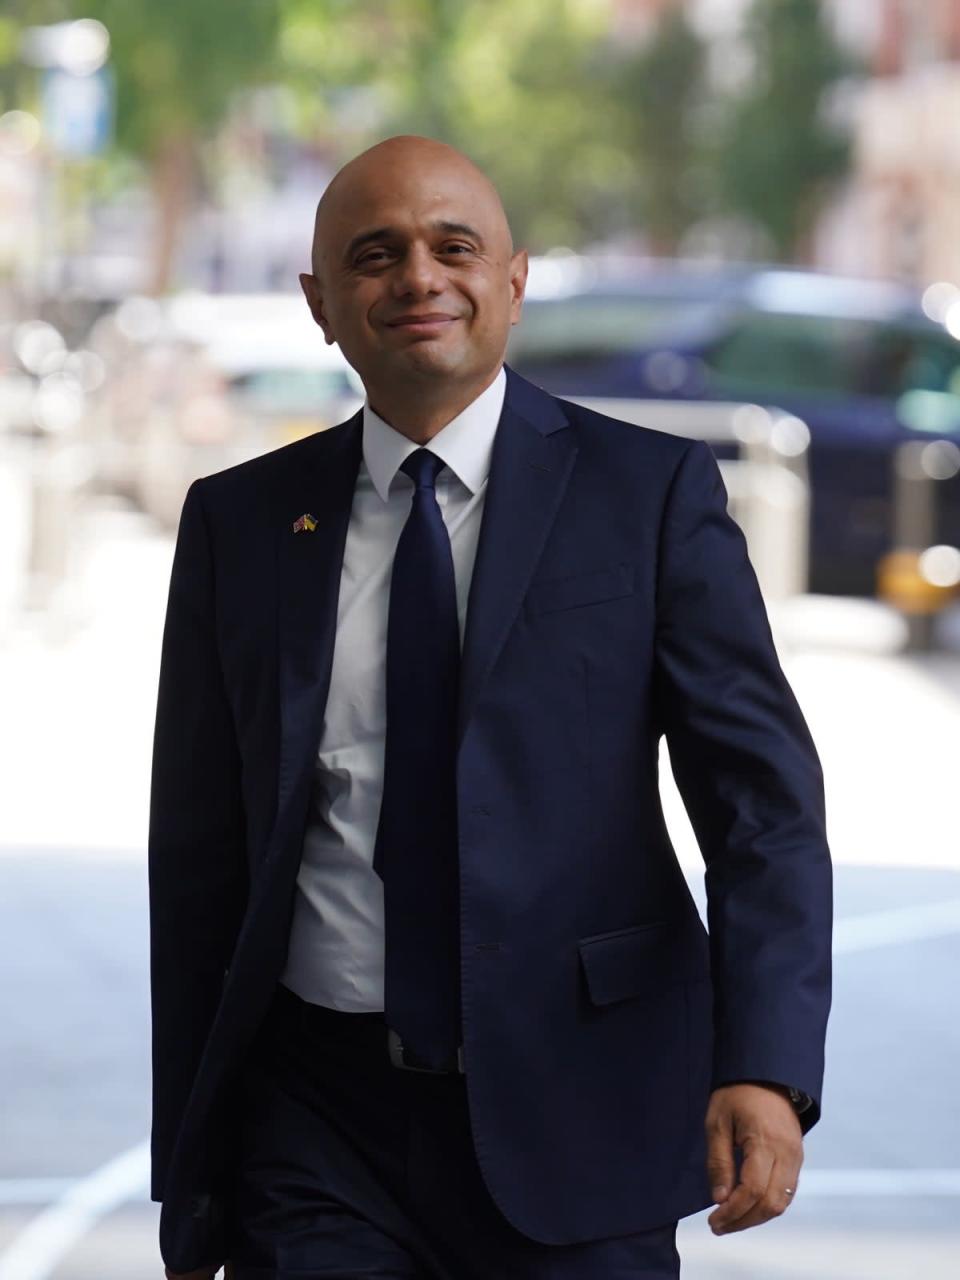 Former health secretary Sajid Javid arrives at BBC Broadcasting House in London, to appear on Sunday Morning (Stefan Rousseau/PA) (PA Wire)